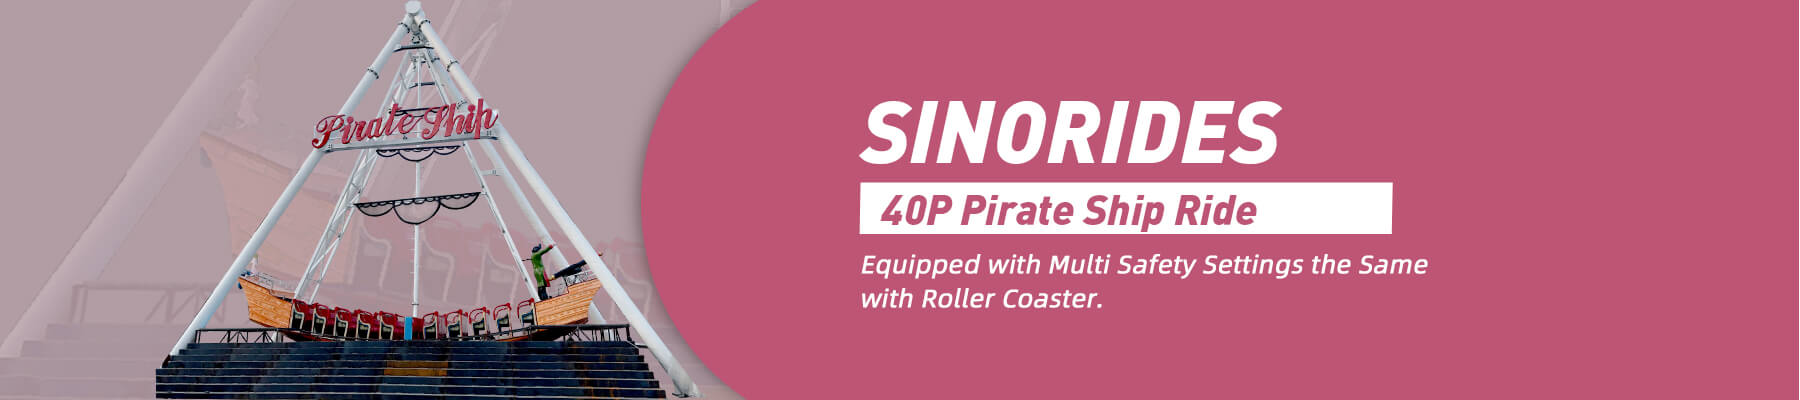 Sinorides Quality 40P Pirate Ship Rides For Sale